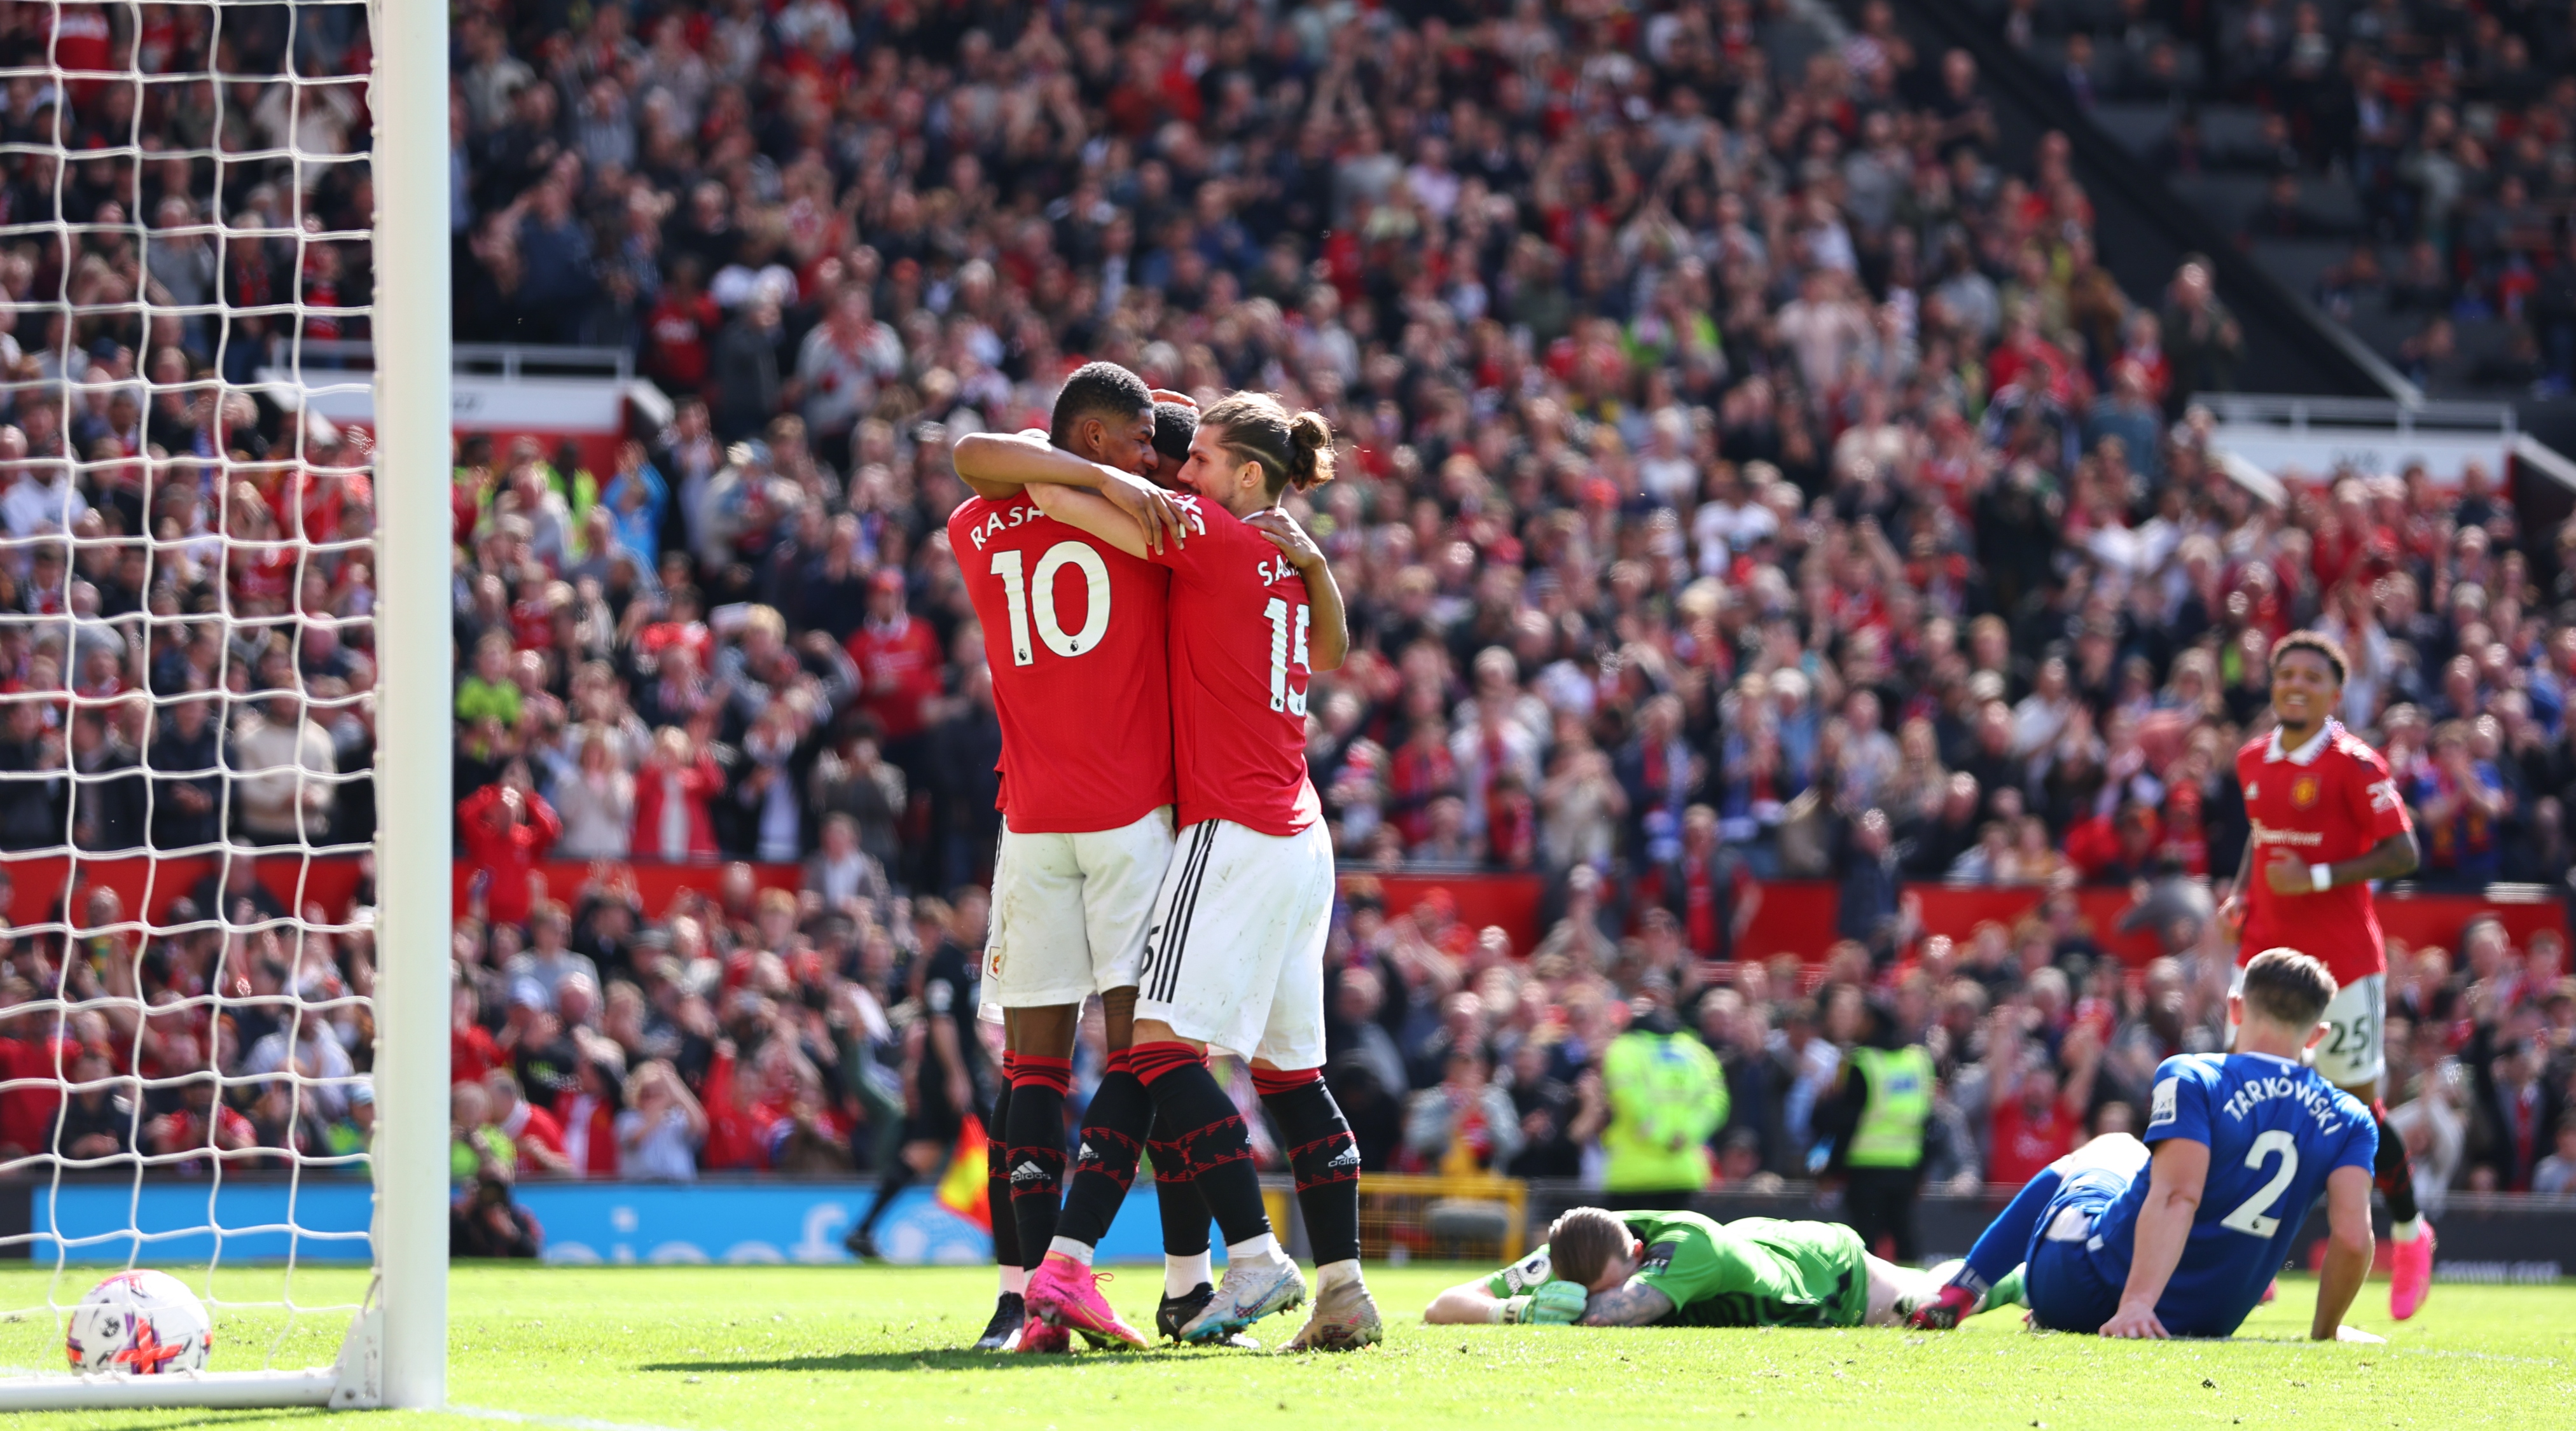 Manchester United cement top-four spot with routine win over lacklustre Everton